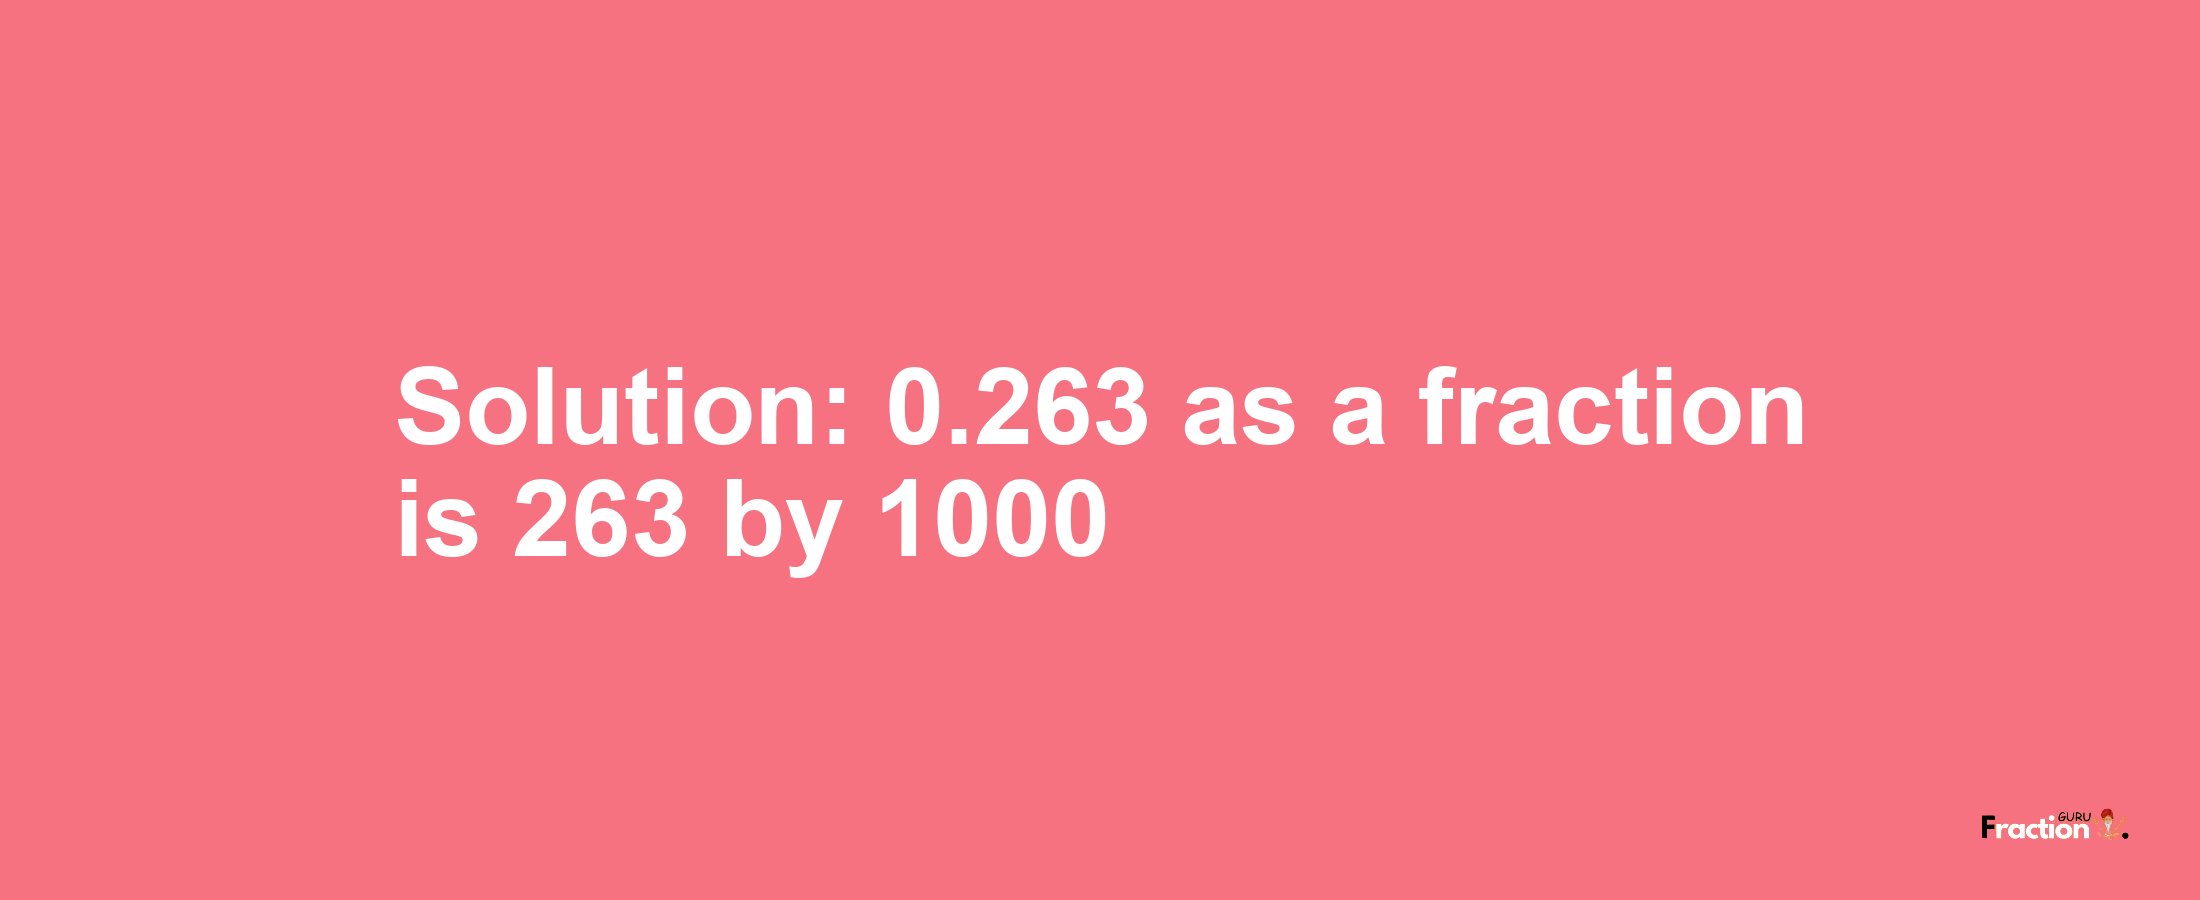 Solution:0.263 as a fraction is 263/1000